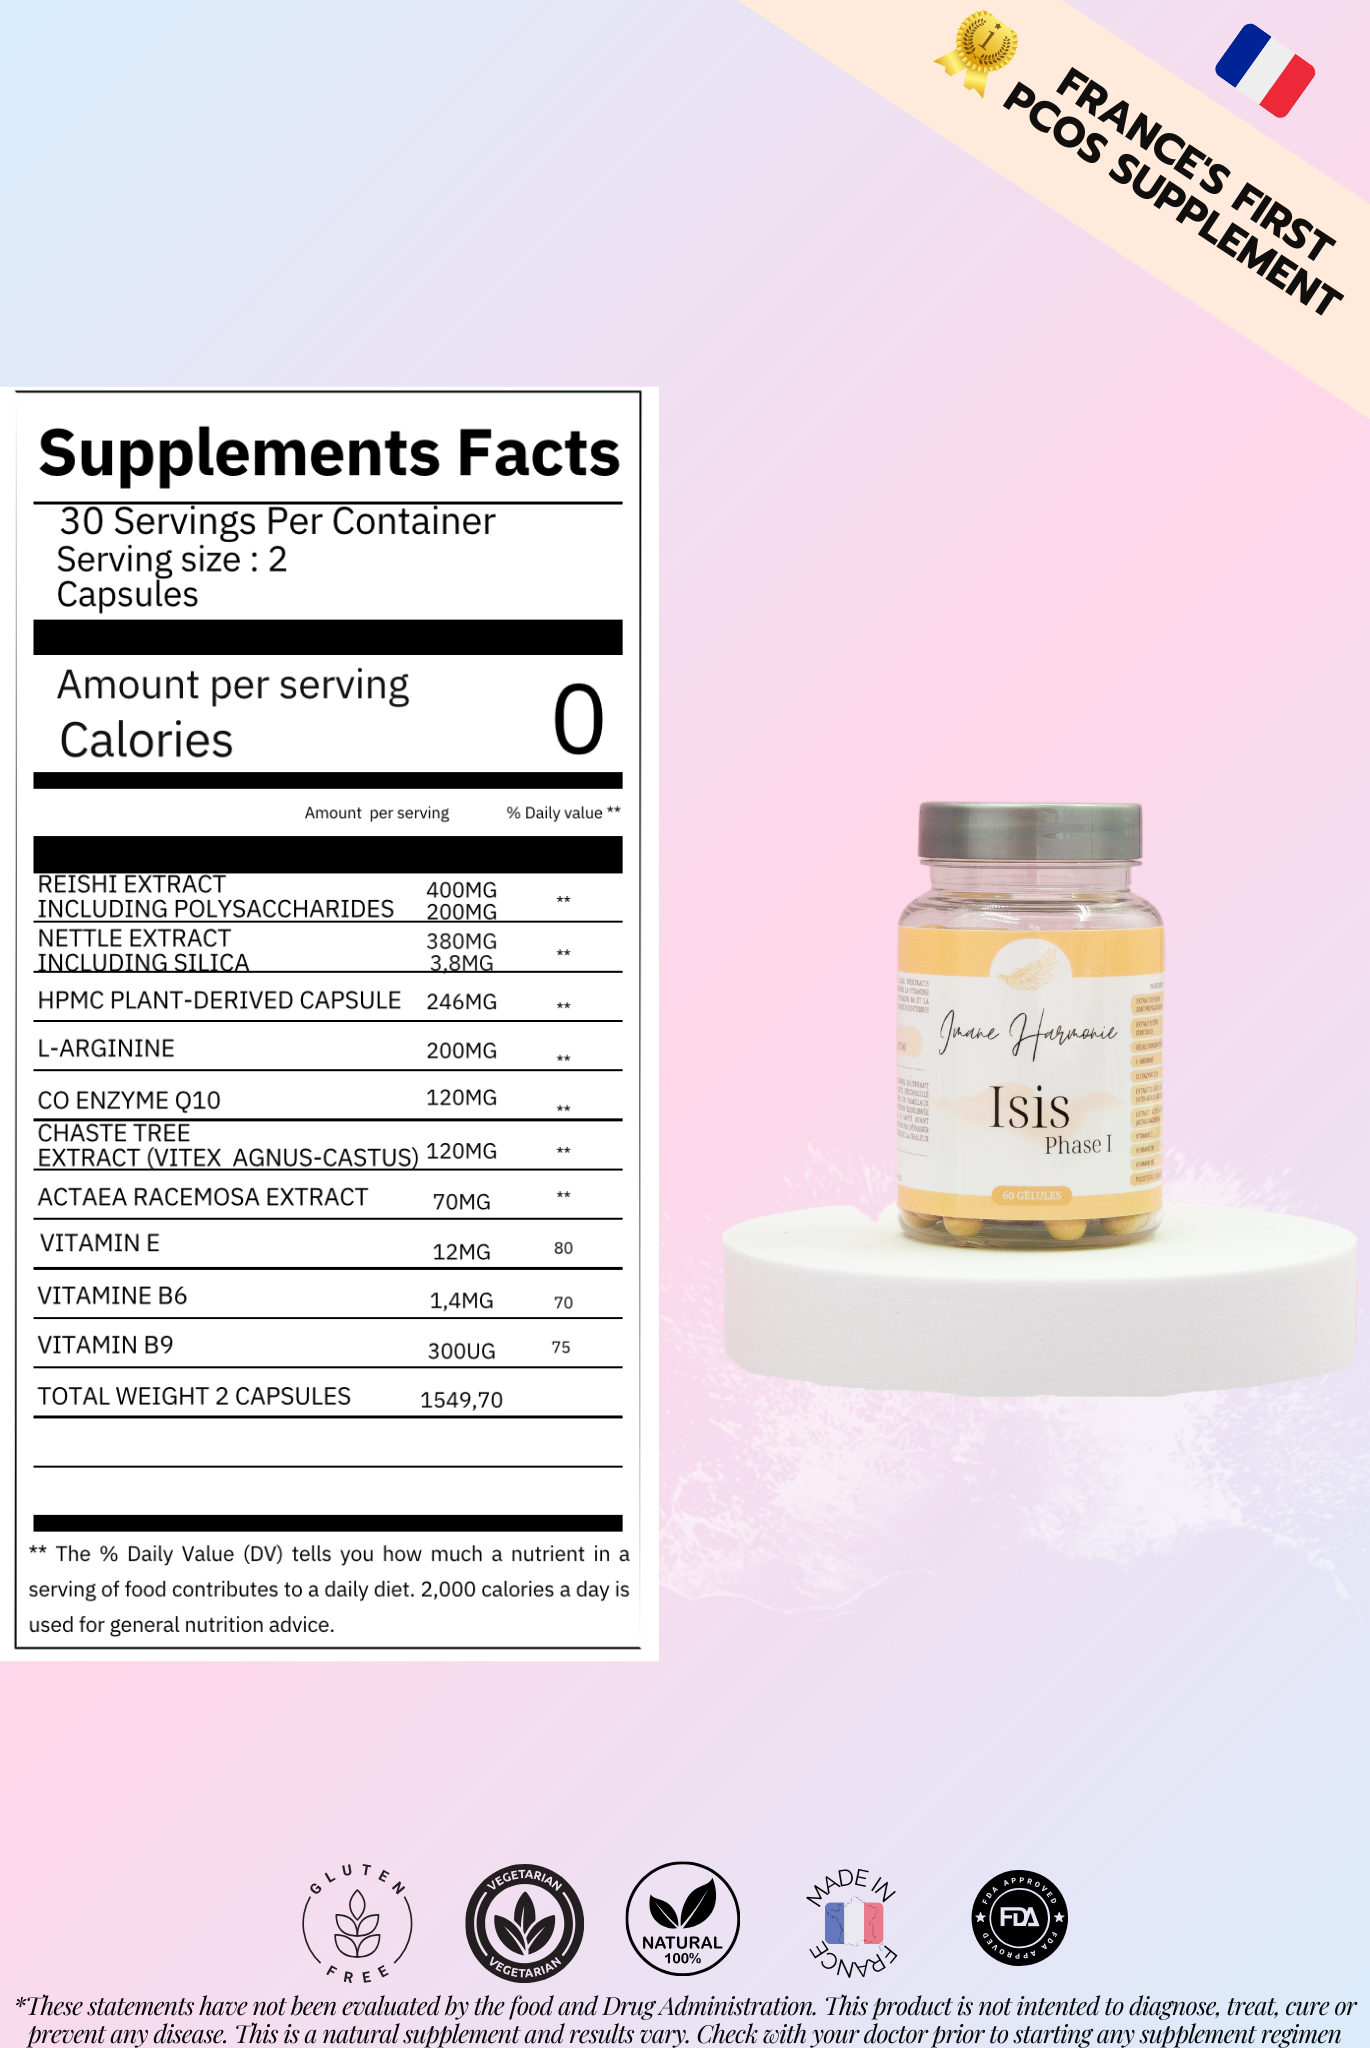 supplements facts of isis phase 1